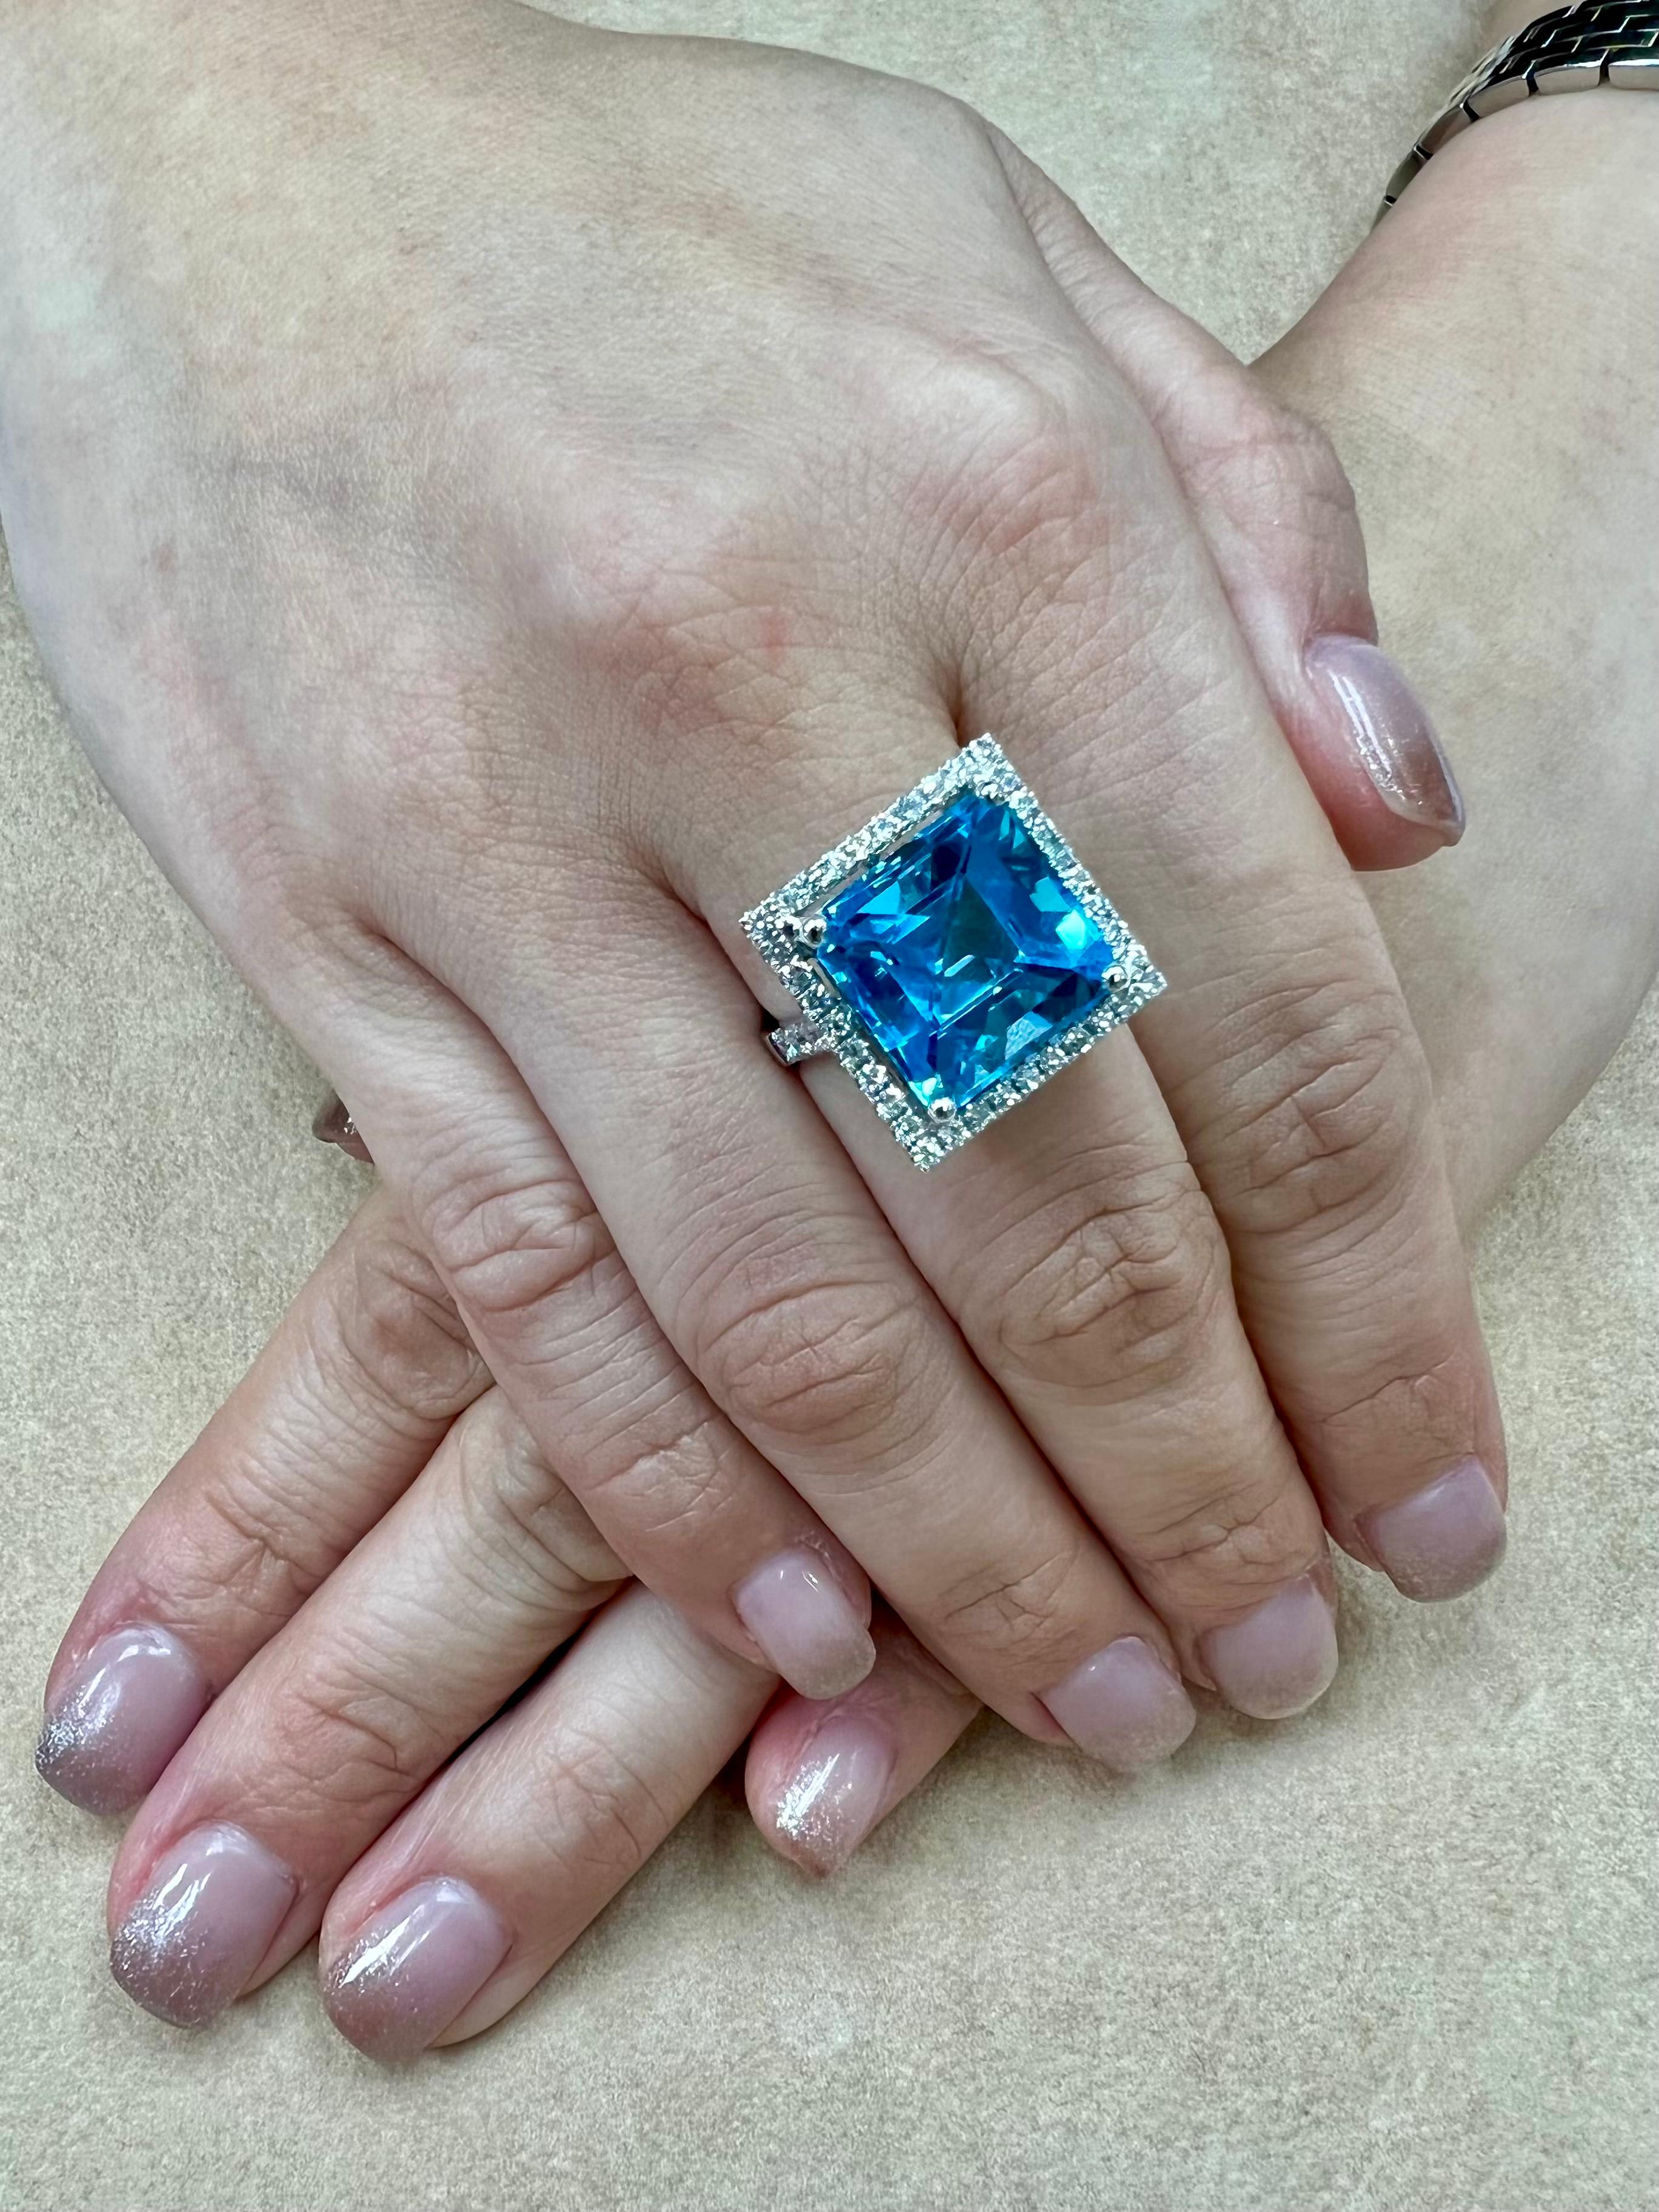 Please check out the HD video! Here is a super nice checker square cut blue Topaz and diamond cocktail statement ring. It is set in 18k white gold. The 13.76 cts center Topaz is stunning. The checker cut is spectacular. The color is an eye catching